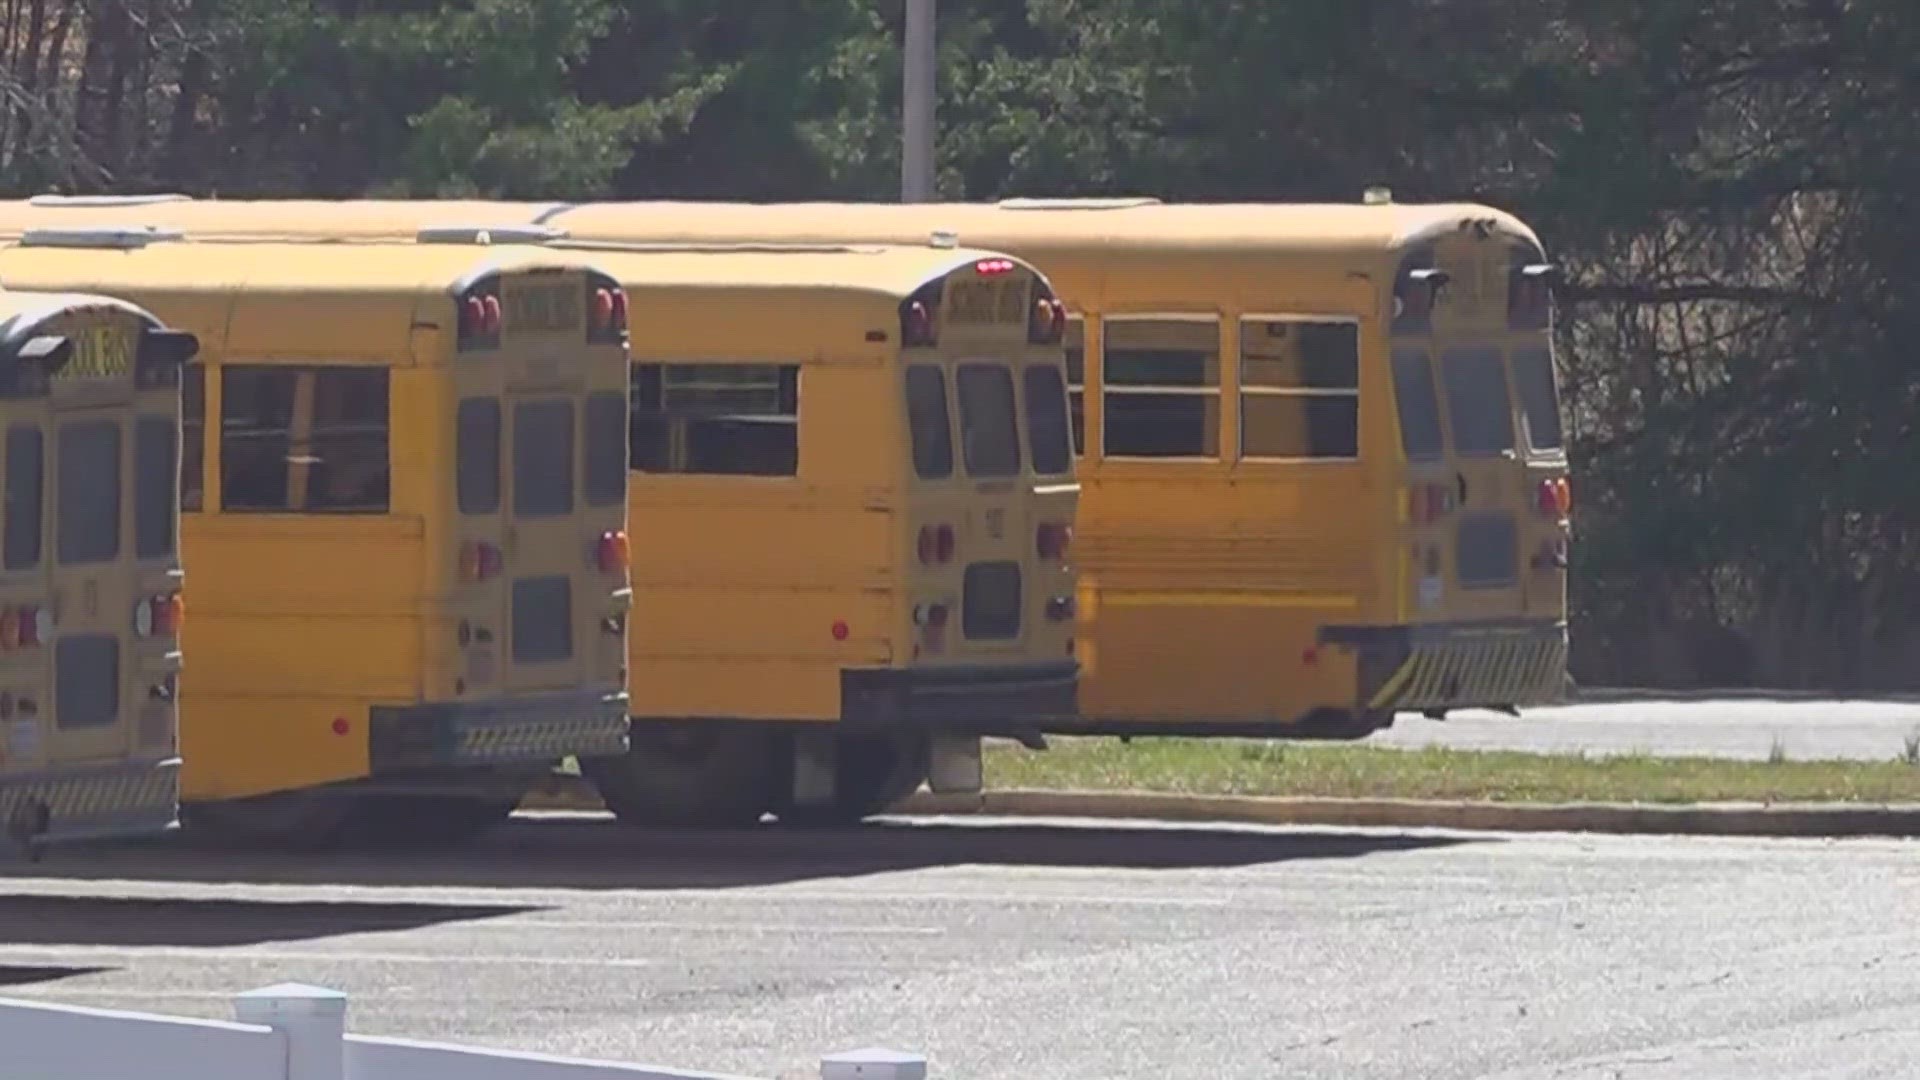 Two parents are facing charges after being accused of assaulting a student on a Randolph County school bus.